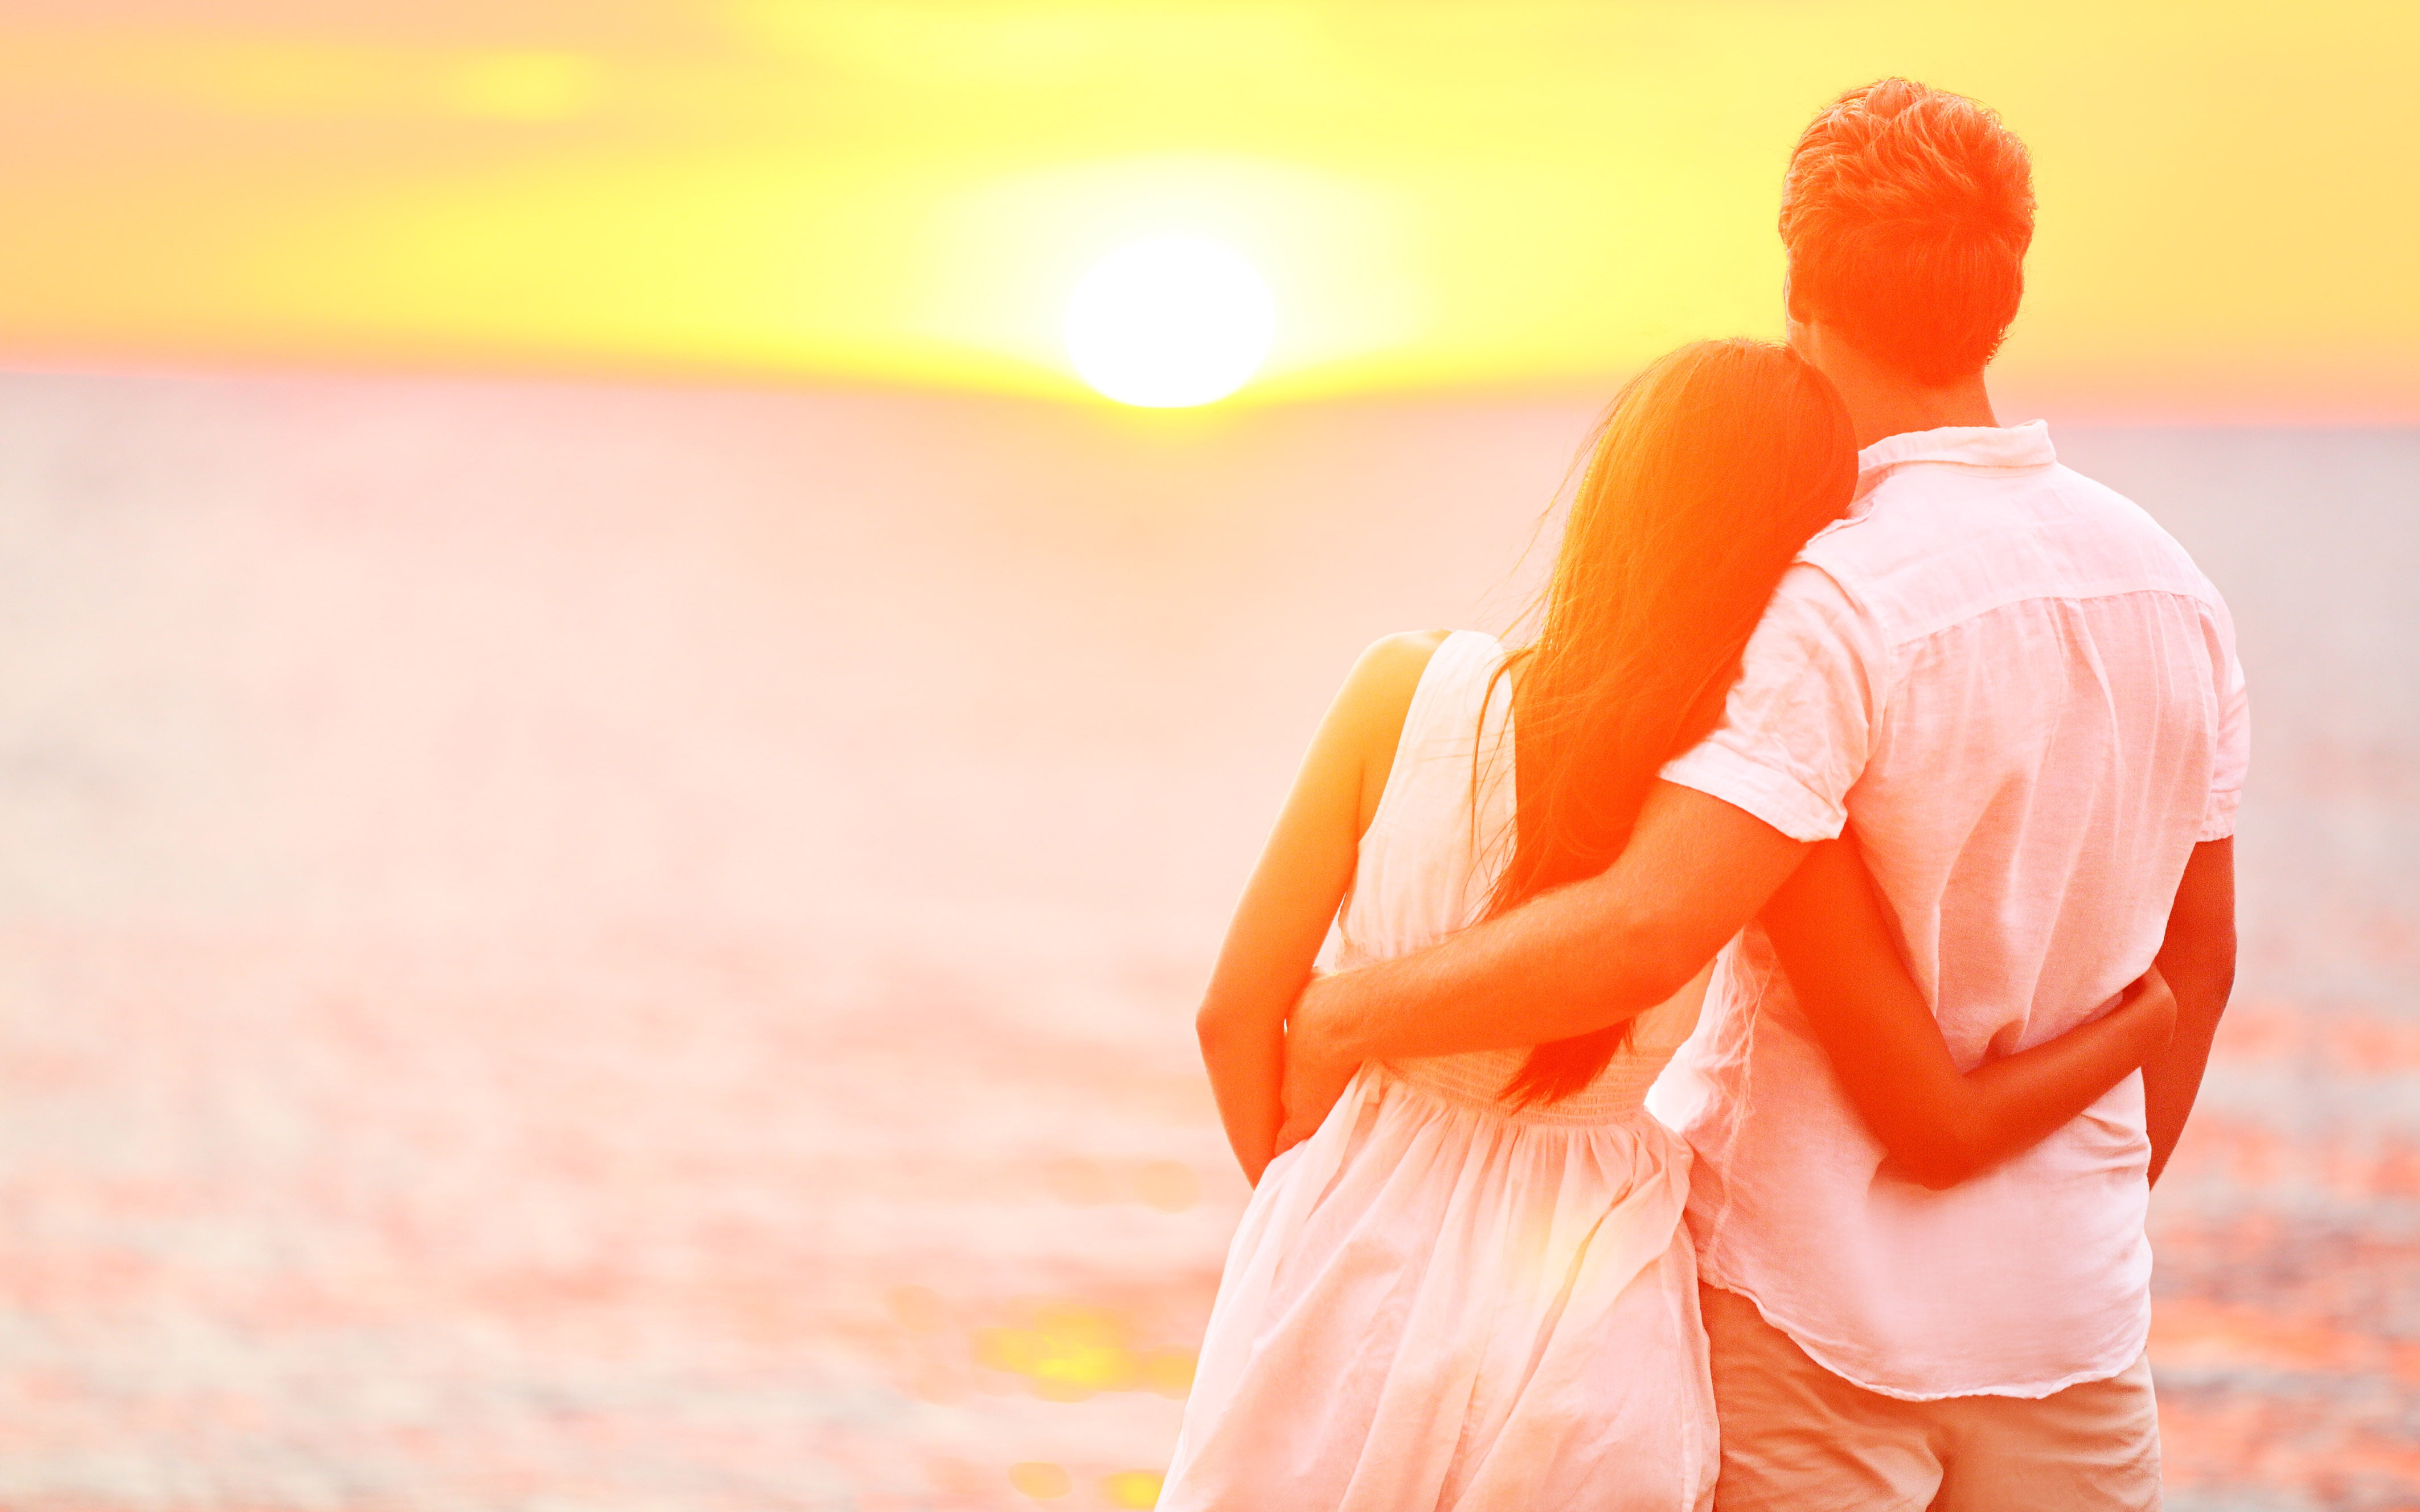 Honeymoon Couple Romantic In Love At Beach Sunset, two people